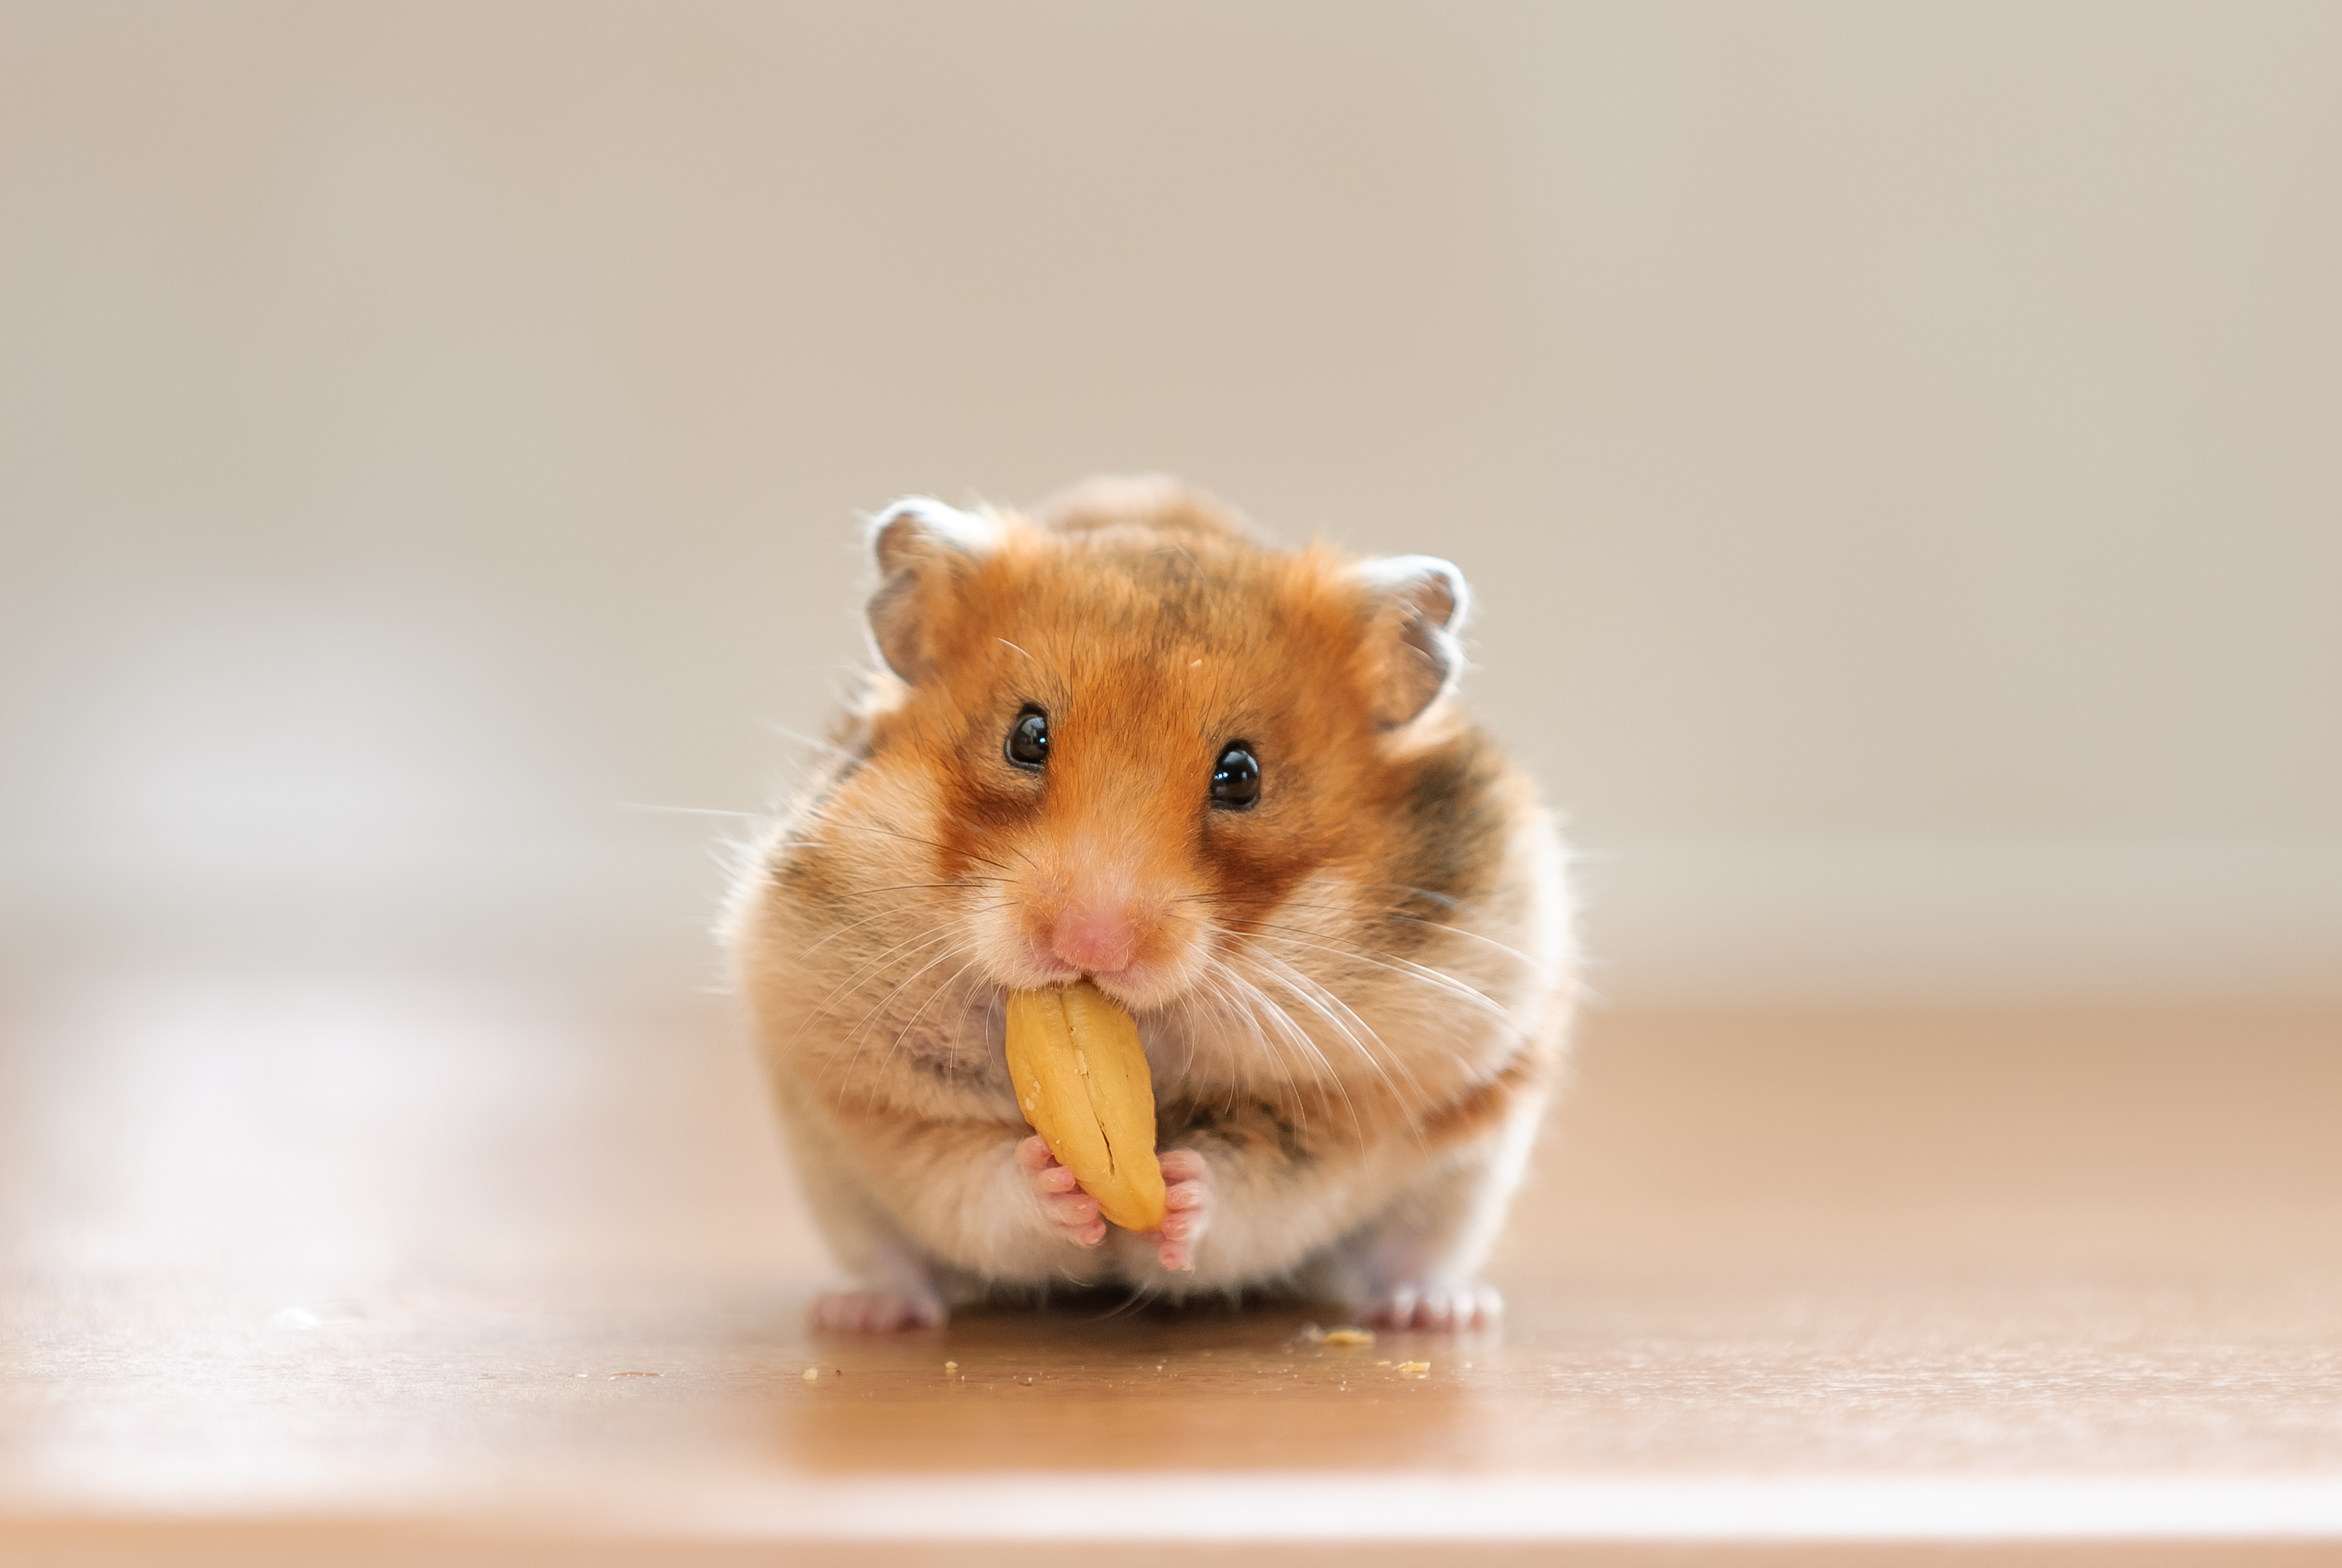 Hamster Life - Android game - They look so cute with full cheeks